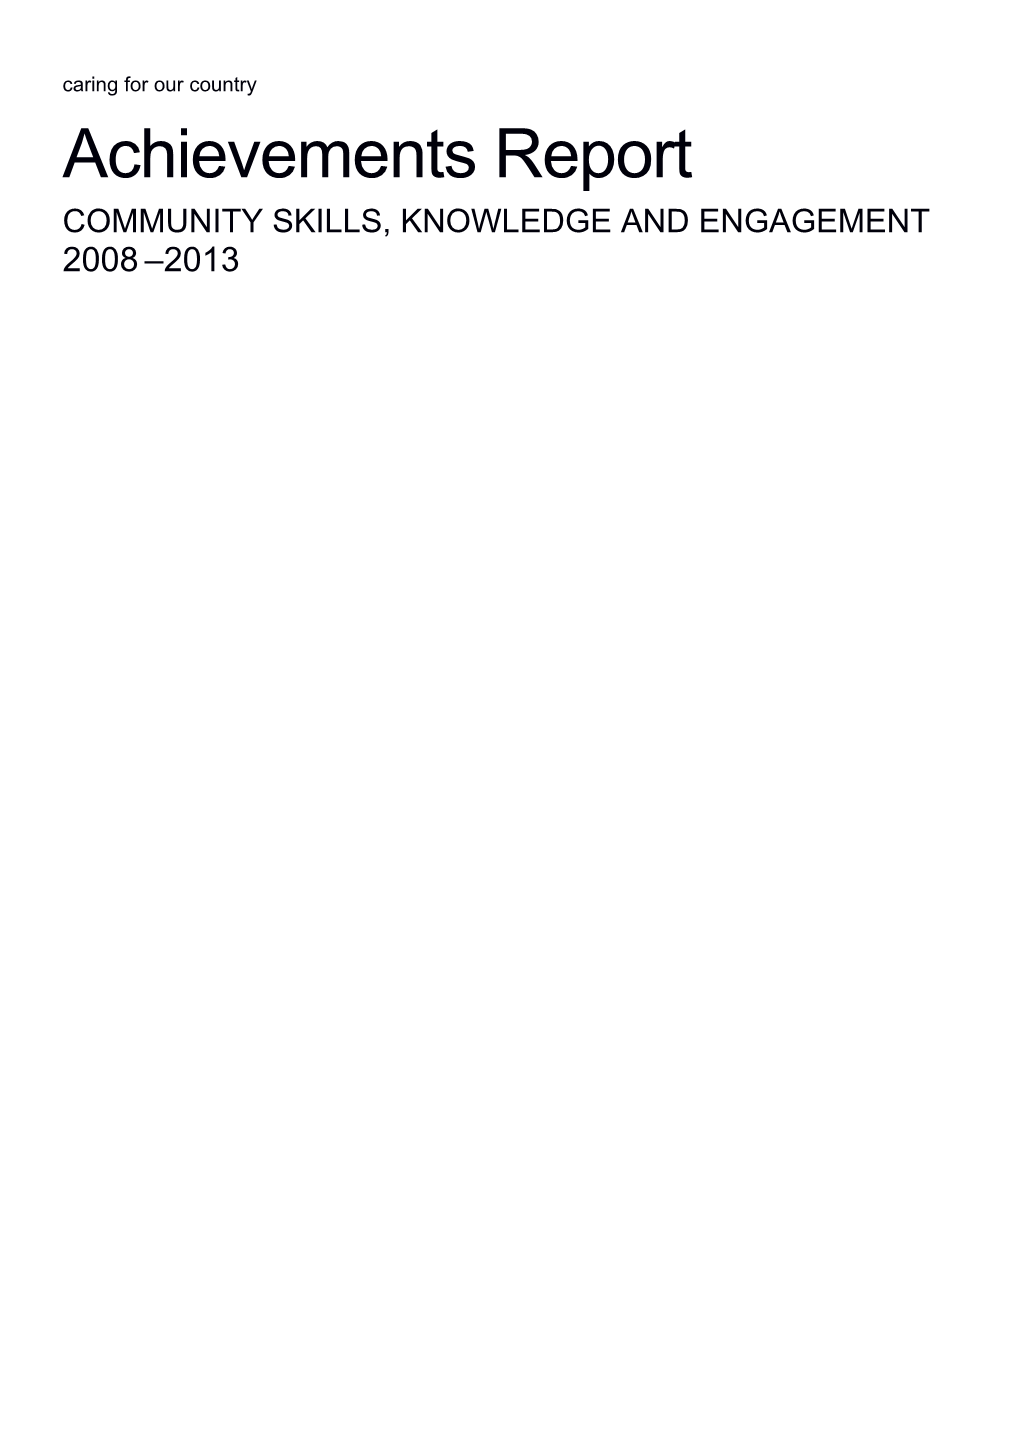 Achievements Report - COMMUNITY SKILLS, KNOWLEDGE and ENGAGEMENT